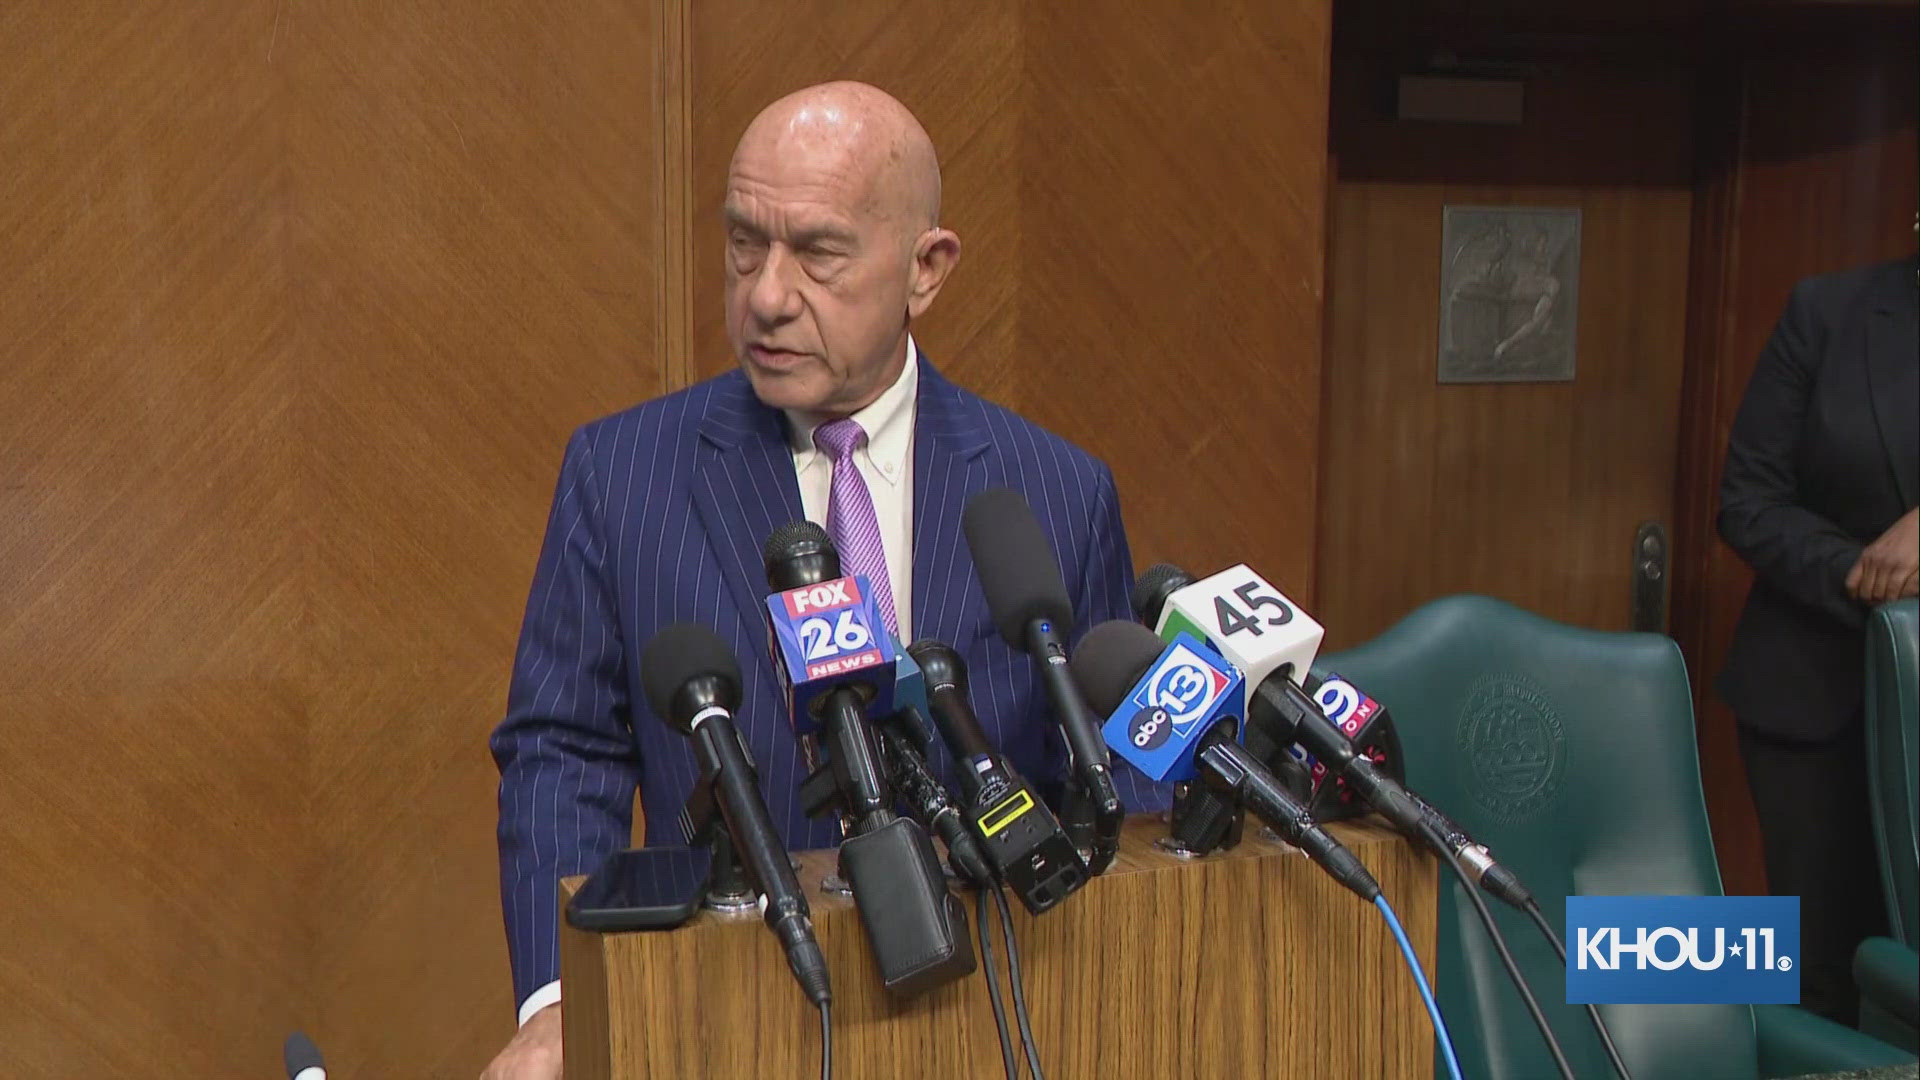 Houston Mayor John Whitmire has accepted the retirement of Troy Finner as police chief, he said at Wednesday's City Council meeting.